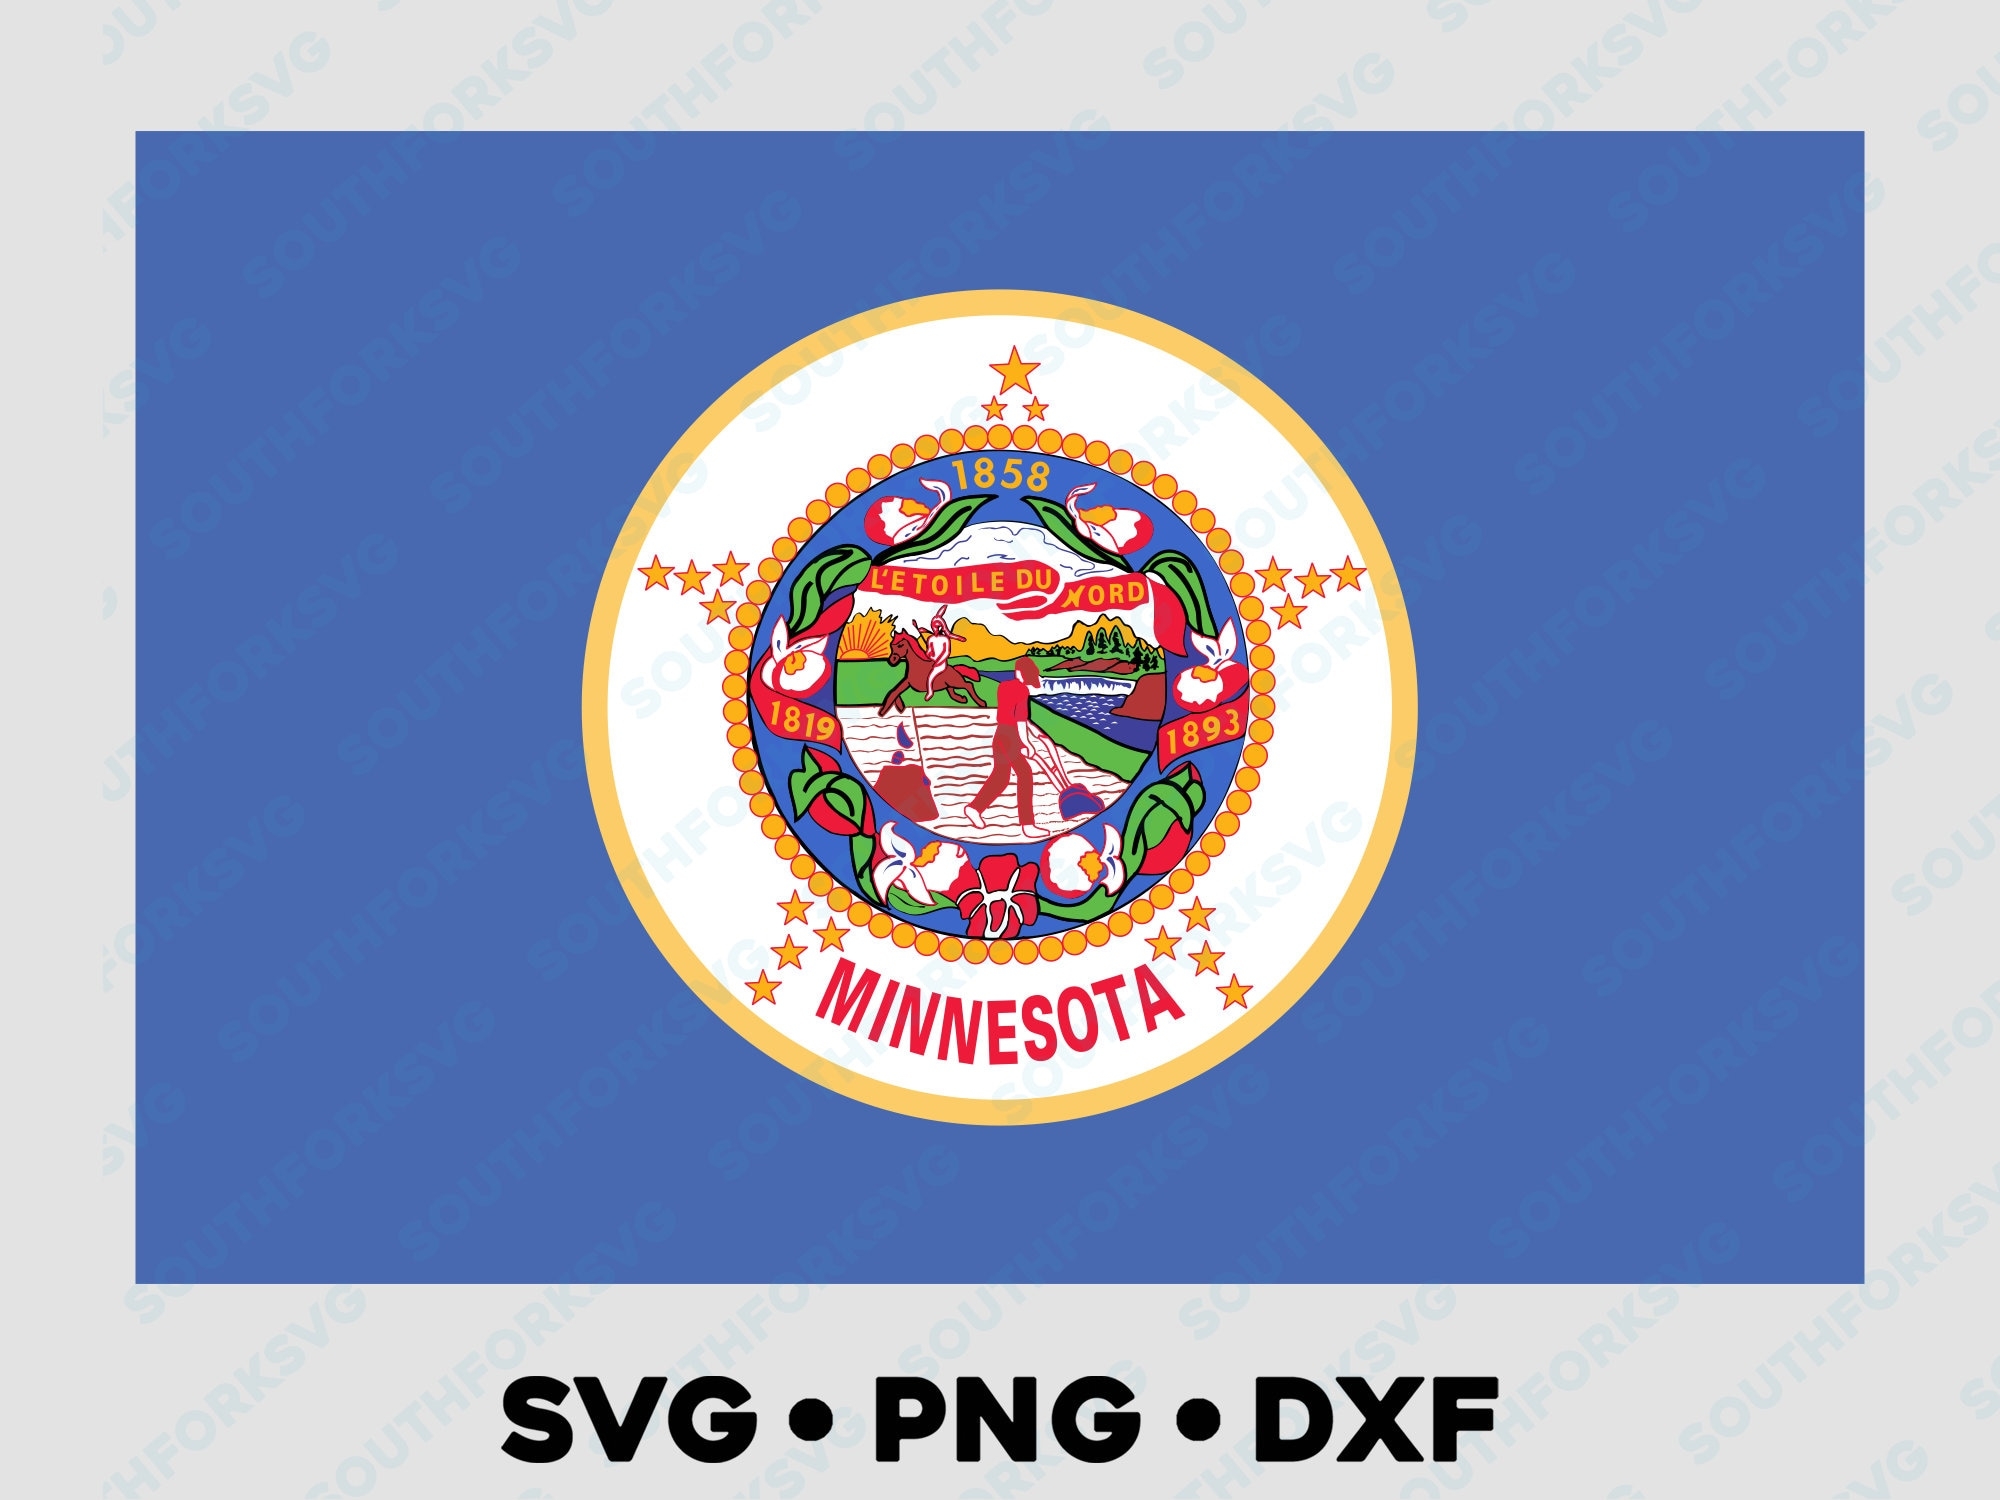 Minnesota State Flag Svg Png Dxf Vector Graphic Design Digital File U S 50 State Flags USA America United States Flags Etsy